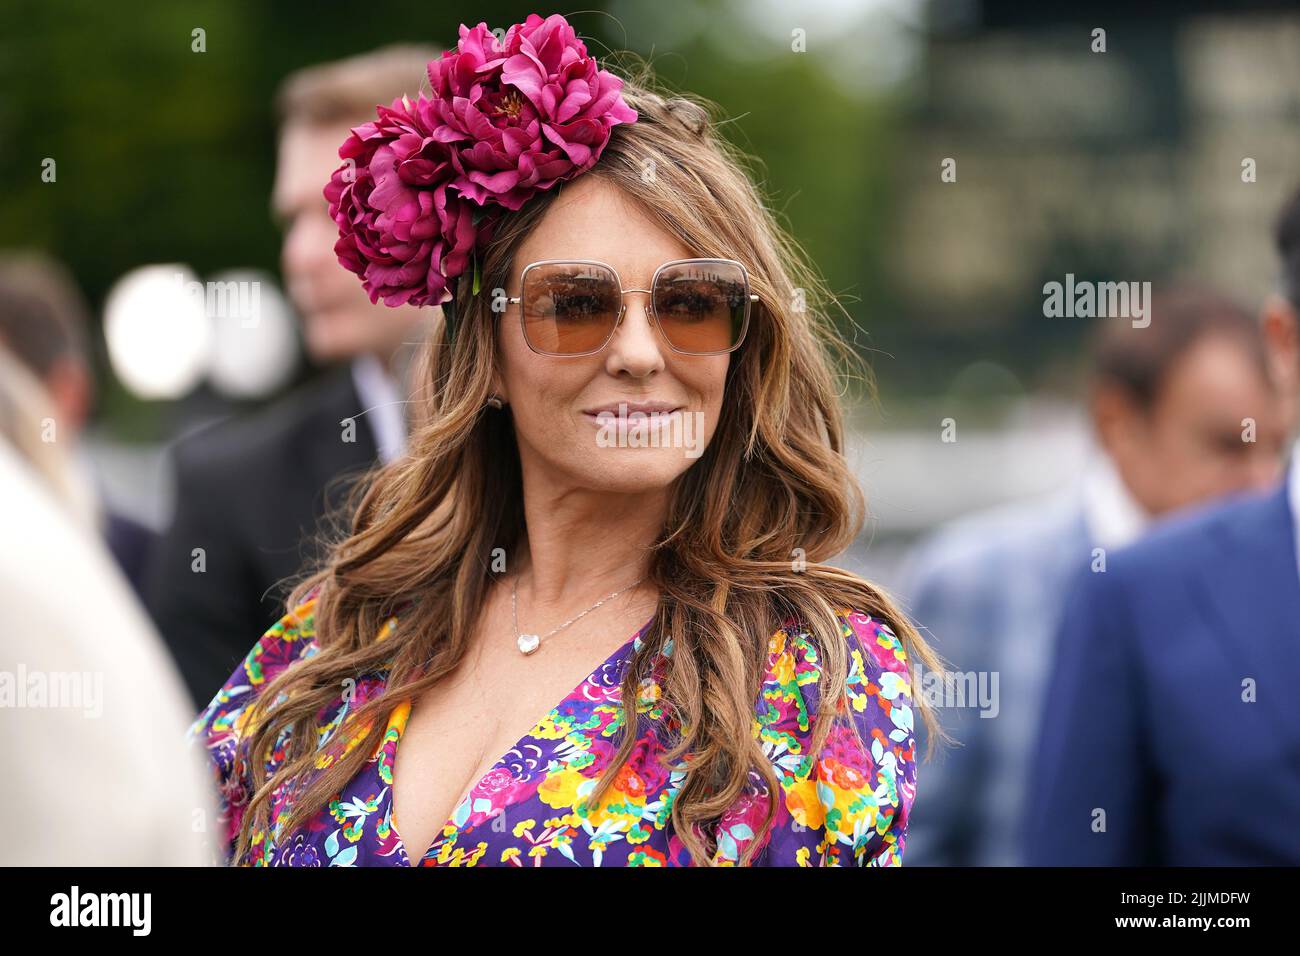 Elizabeth Hurley on day two of the Qatar Goodwood Festival 2022 at Goodwood Racecourse, Chichester. Picture date: Wednesday July 27, 2022. Stock Photo